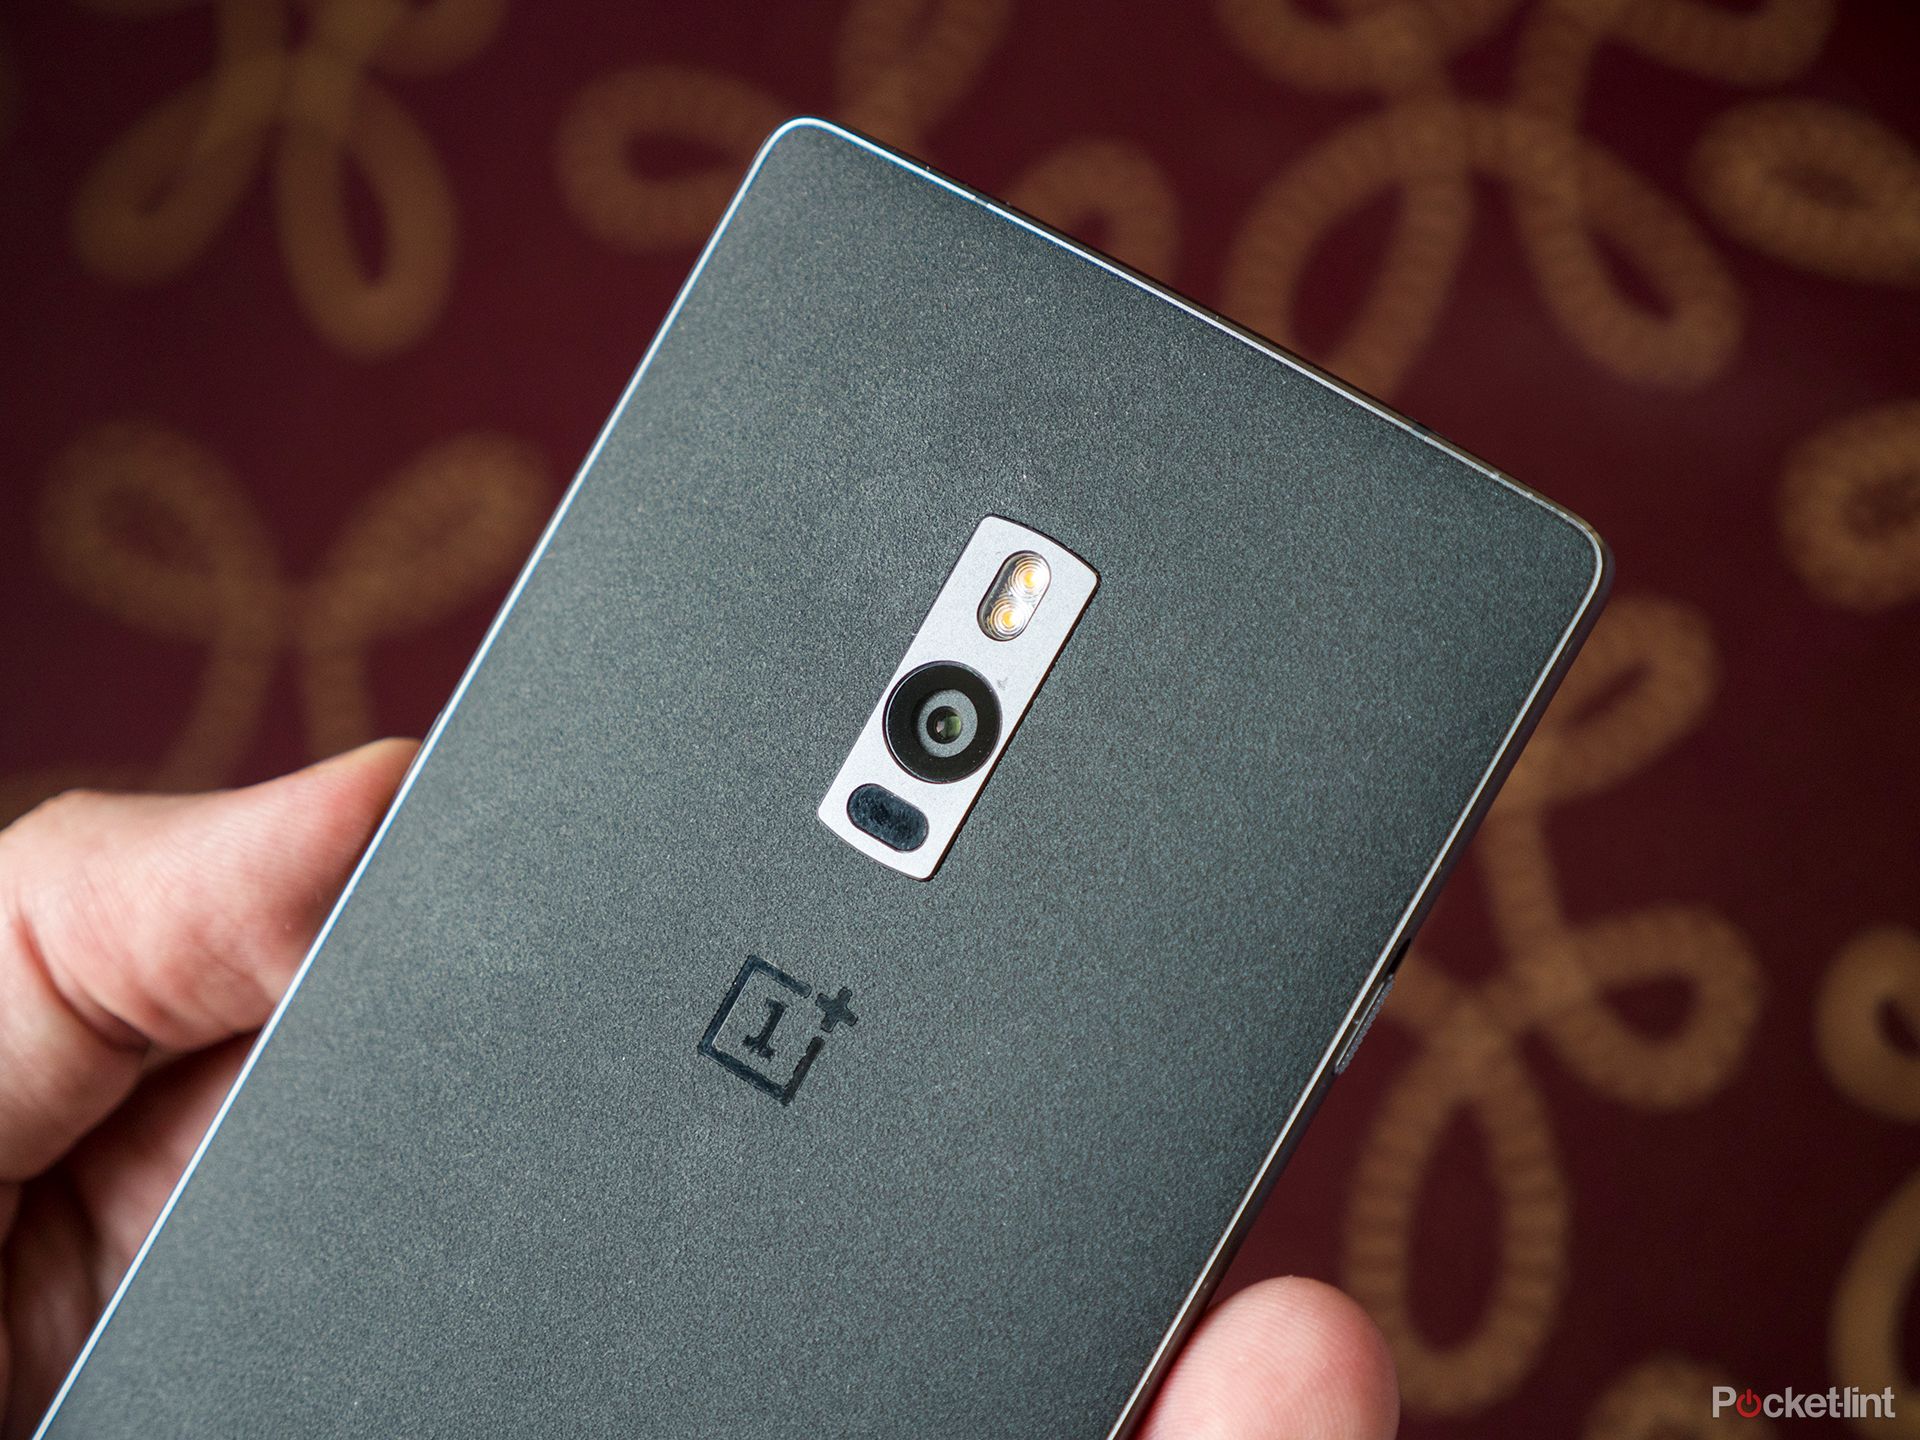 no oneplus invite no problem oneplus 2 and oneplus x are available invite free this week image 1